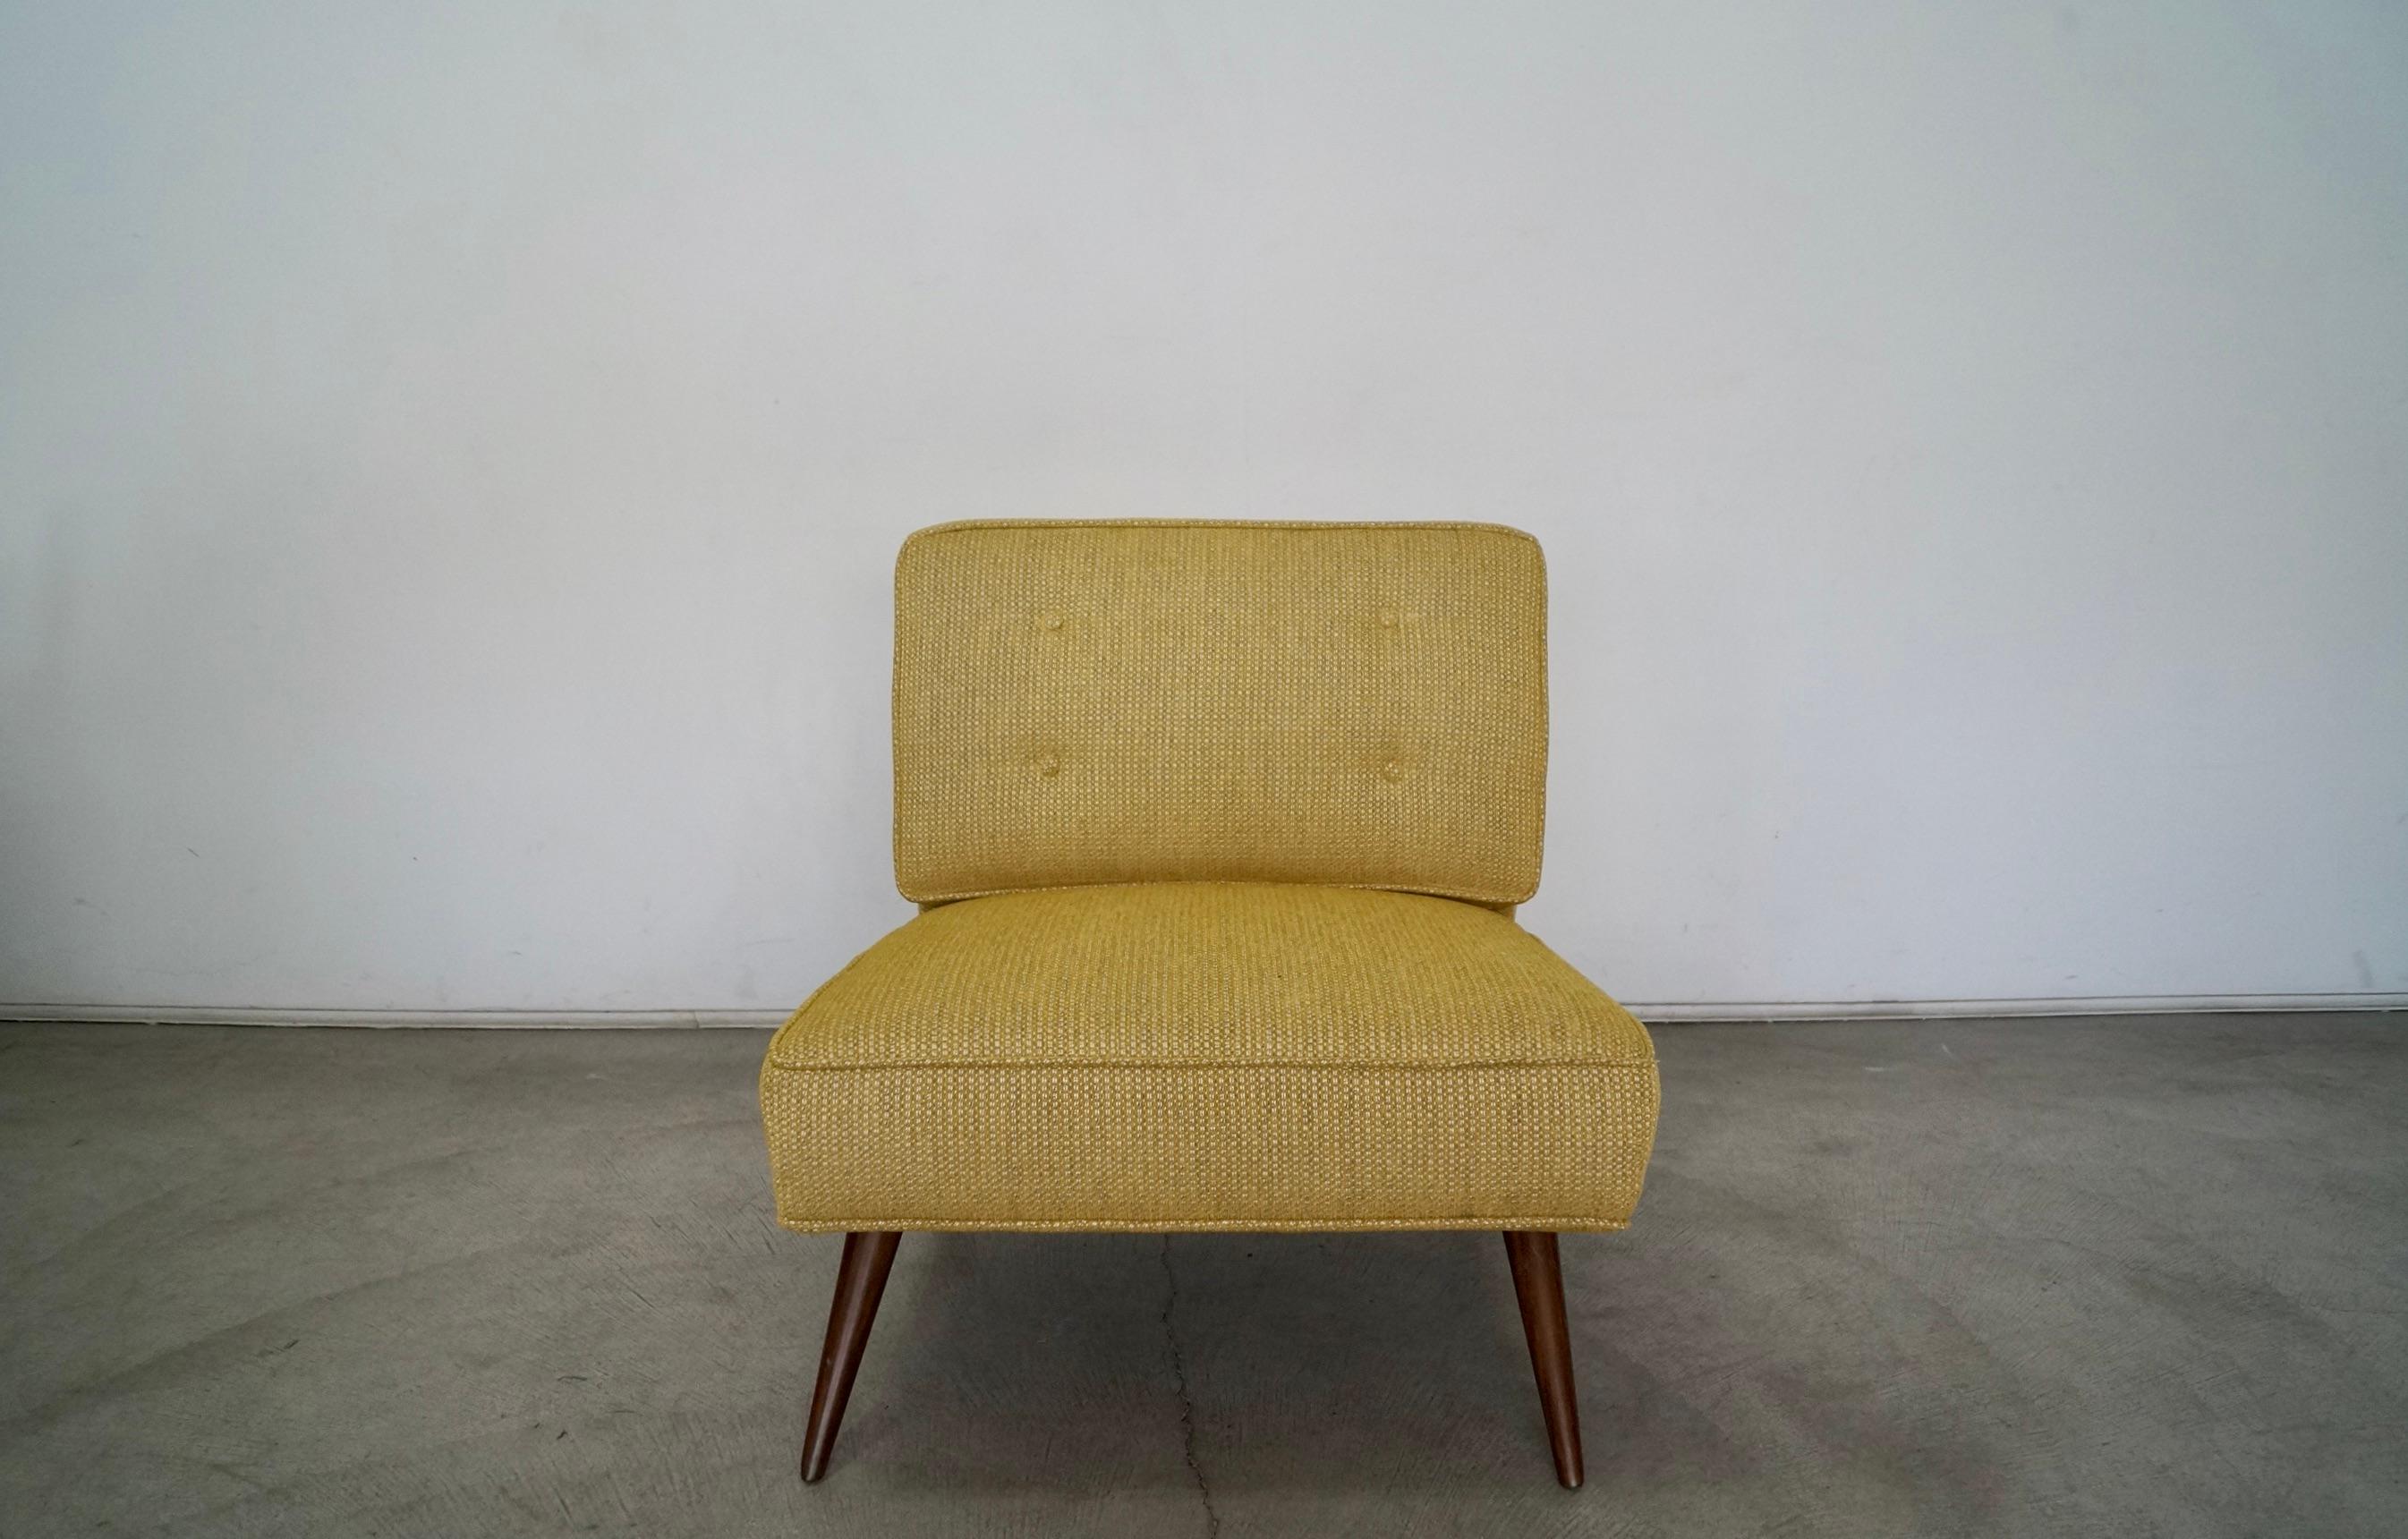 Vintage 1950s Mid-Century Modern lounge chair for sale. The legs have been professionally refinished in walnut, and it has been professionally reupholstered in new fabric and foam. The fabric is gold with a gray and white undertone that is